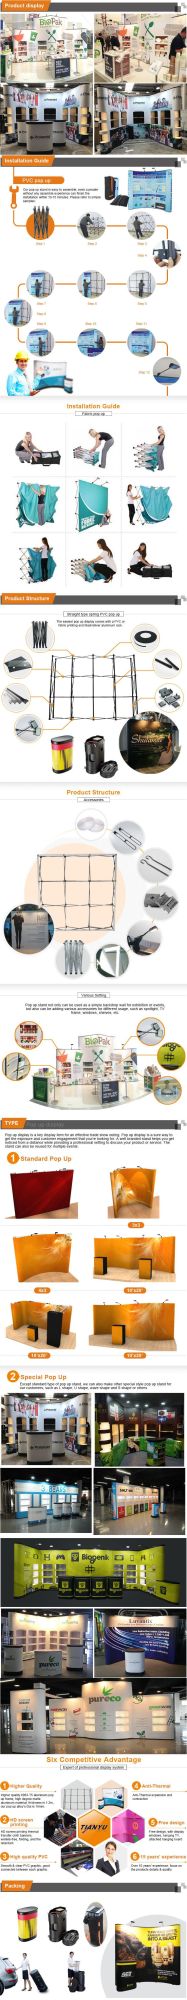 Promotional Advertising Pop up Display Stand, Pop up Stand From Tianyu Display